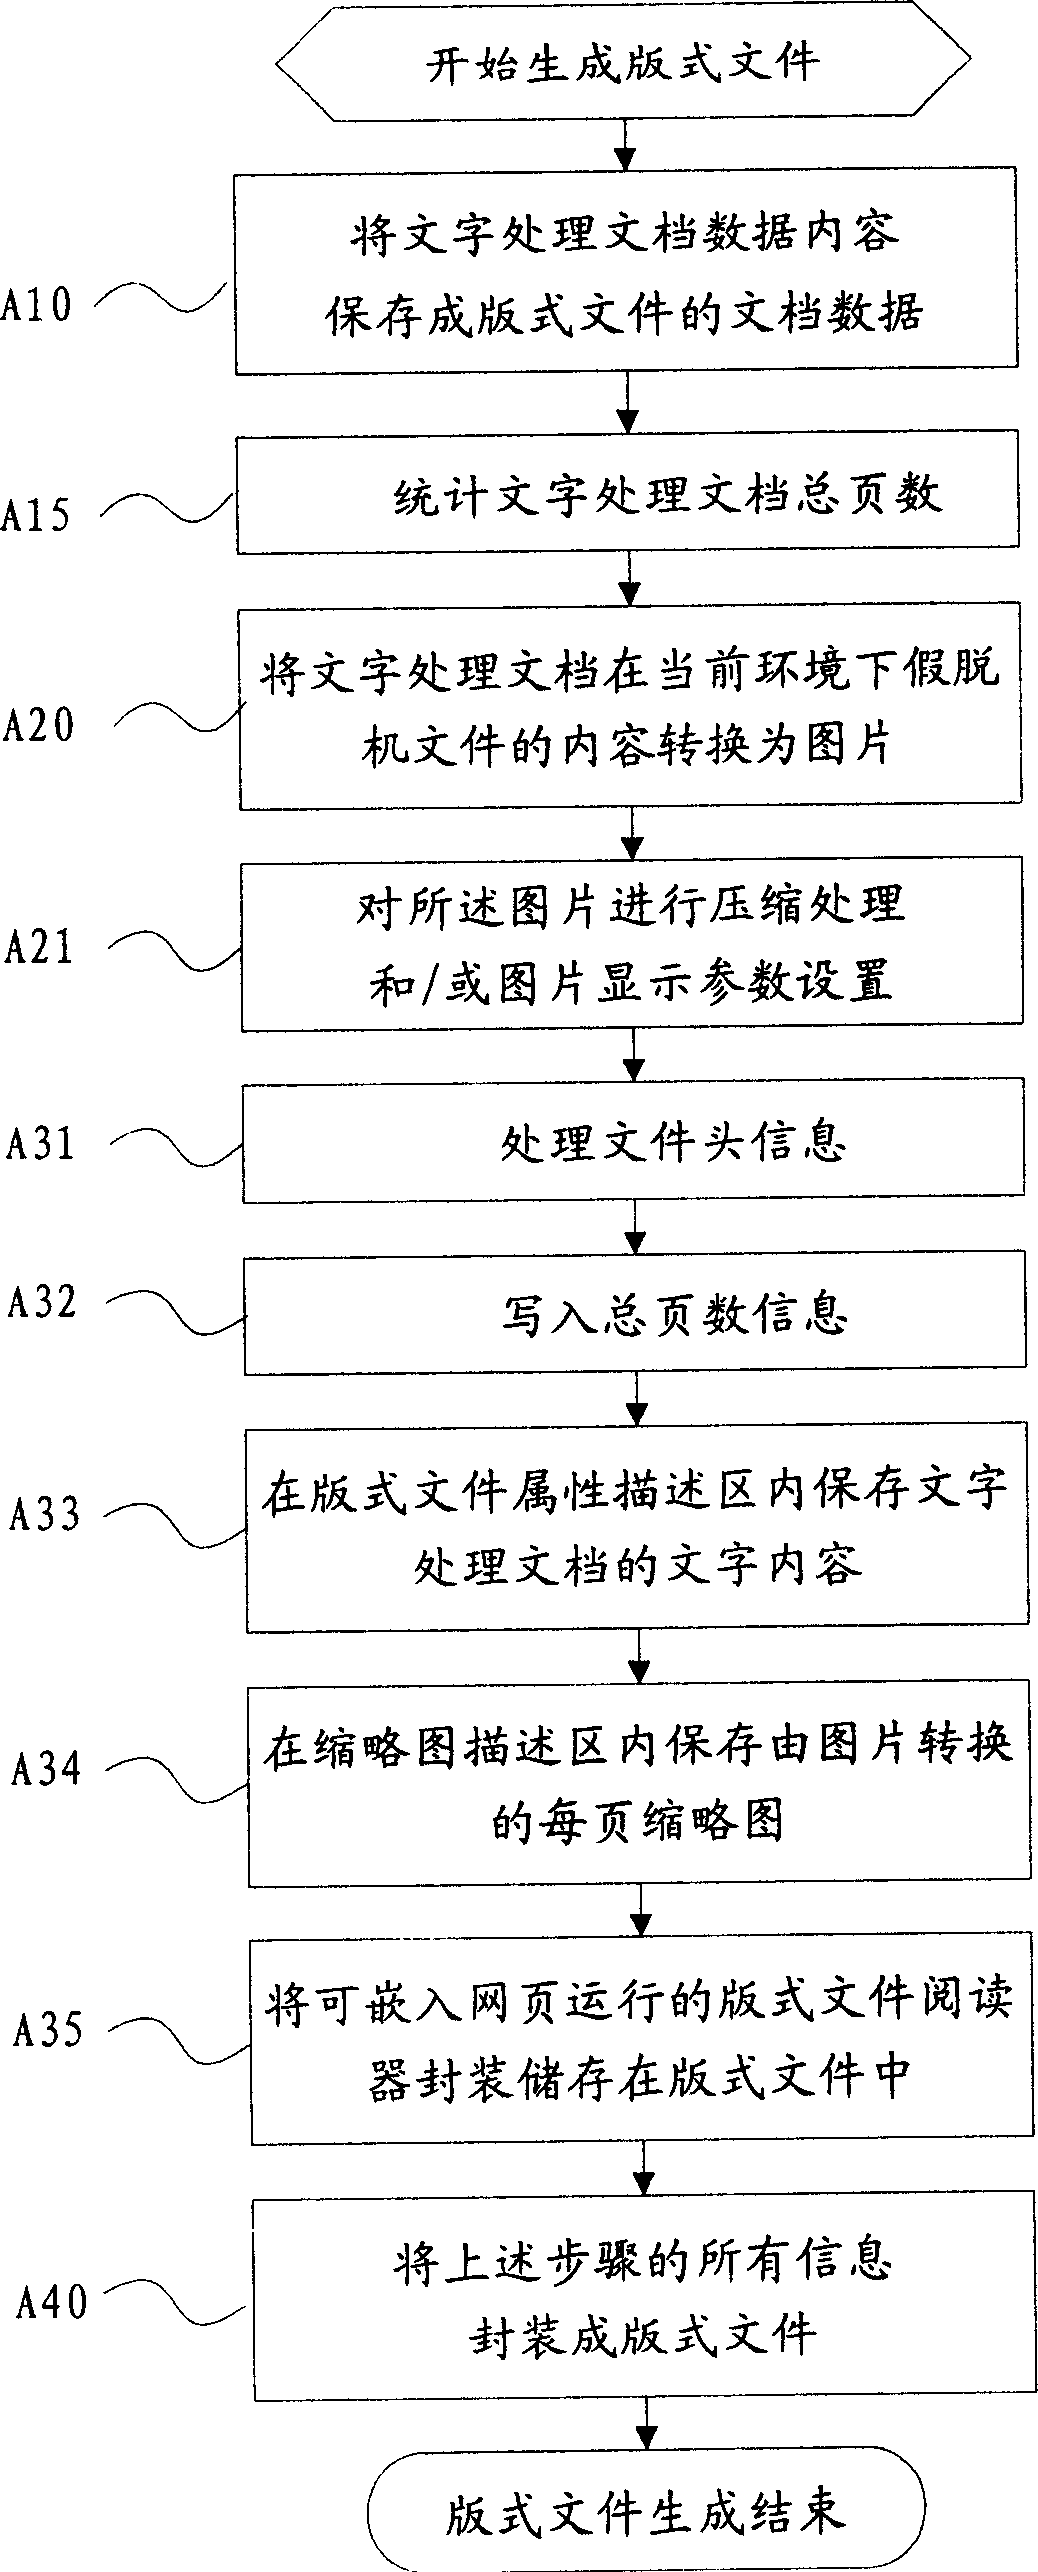 Generating method of computer format document and opening method